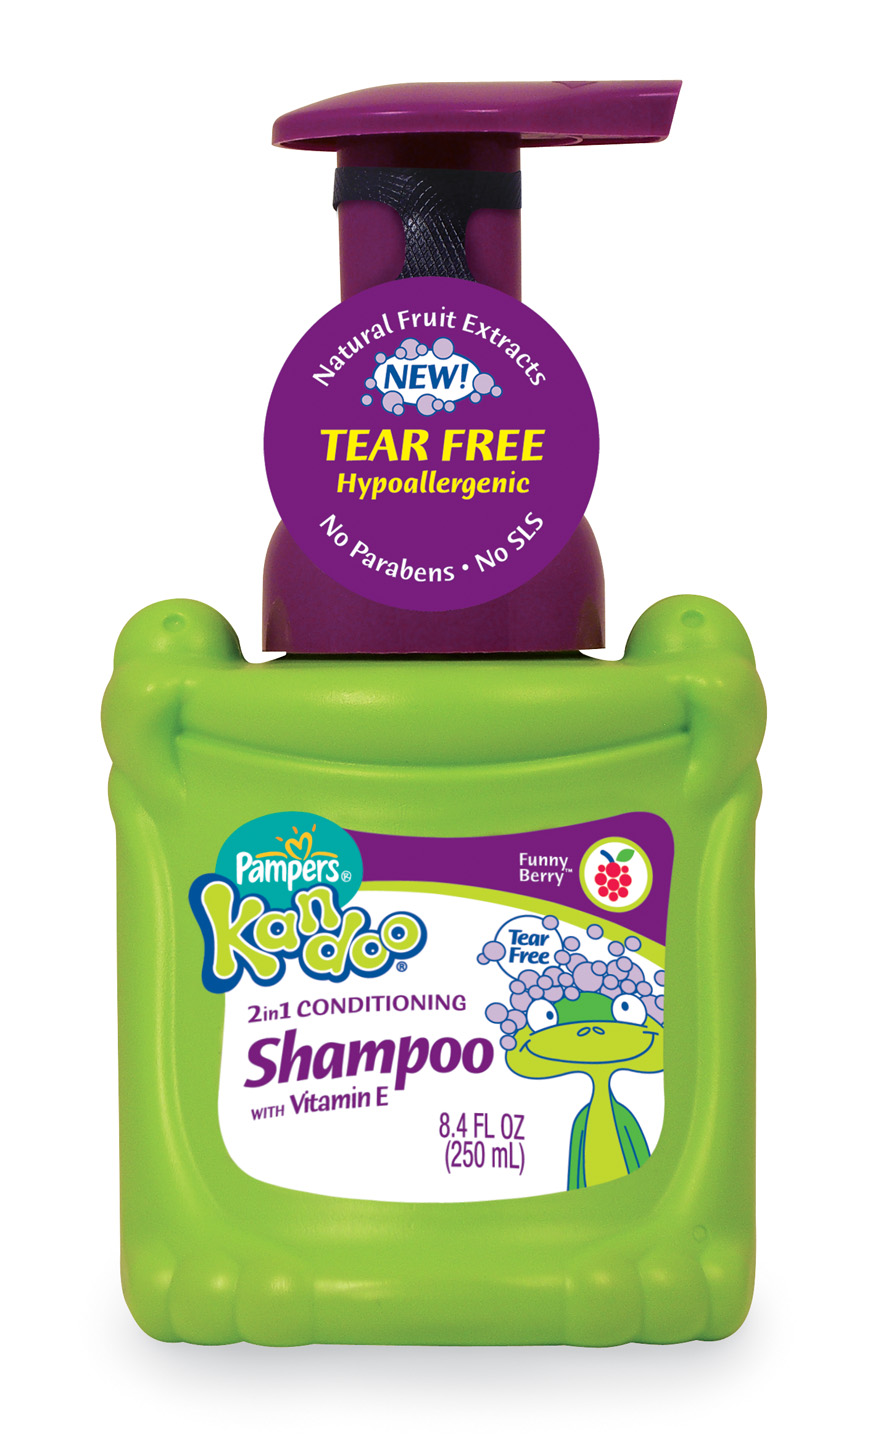 Pampers Kandoo 2-in-1 Conditioning Shampoo (Review & Giveaway